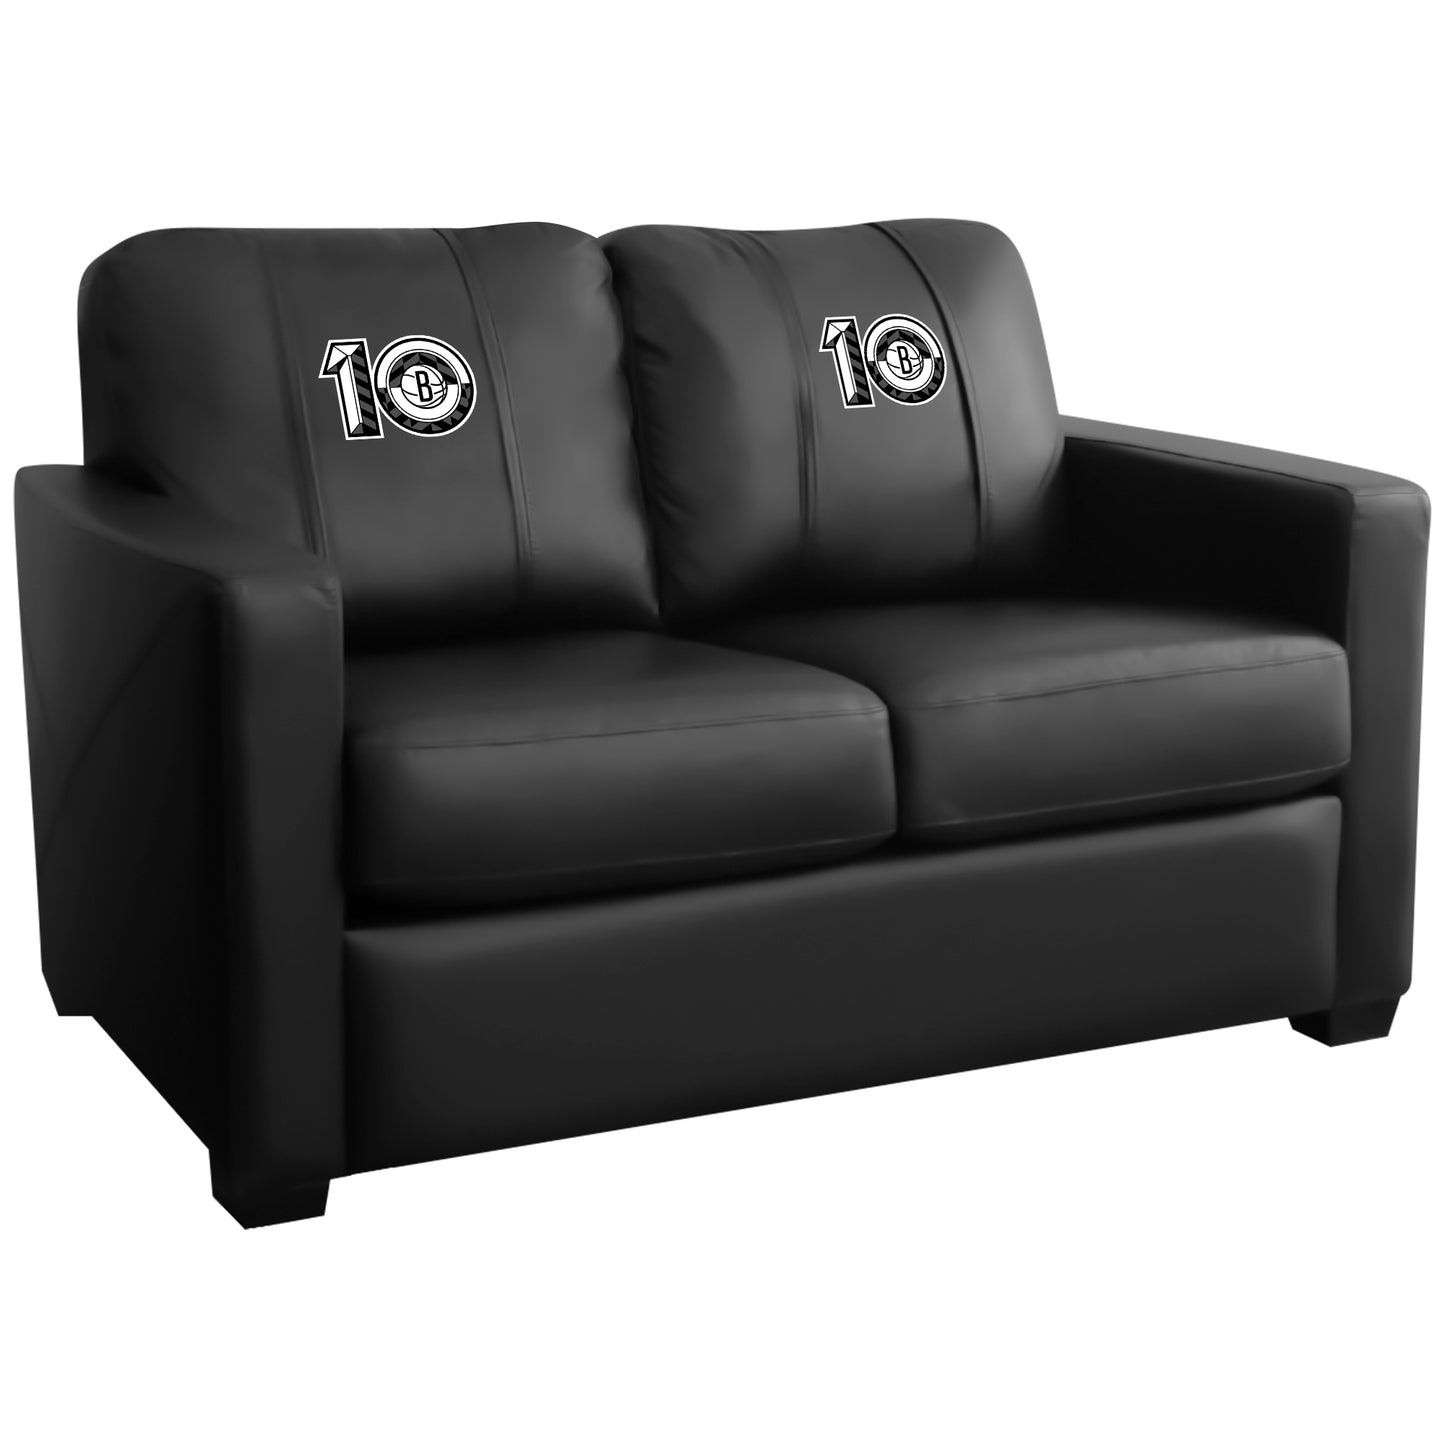 Silver Loveseat with Brooklyn Nets Team Commemorative Logo